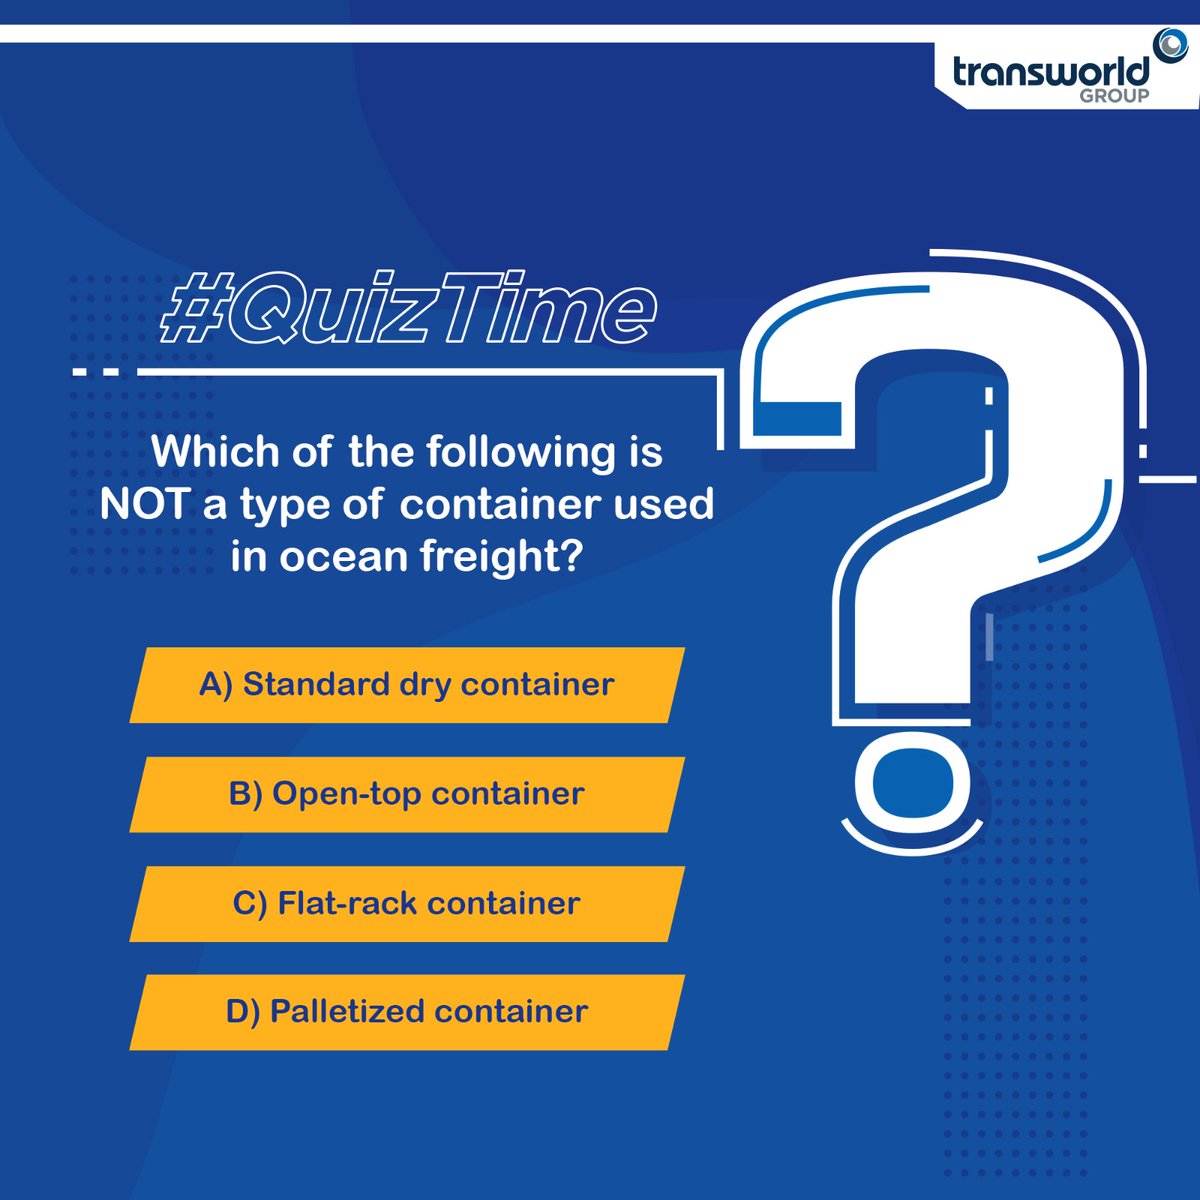 Are you aware of every shipping terminology? Put on your thinking  caps and guess the answer in the comments section below! ​
​
#TransworldGroup #Shipping #Logistics #QuizTime #FunTime #Container #ShippingContainer